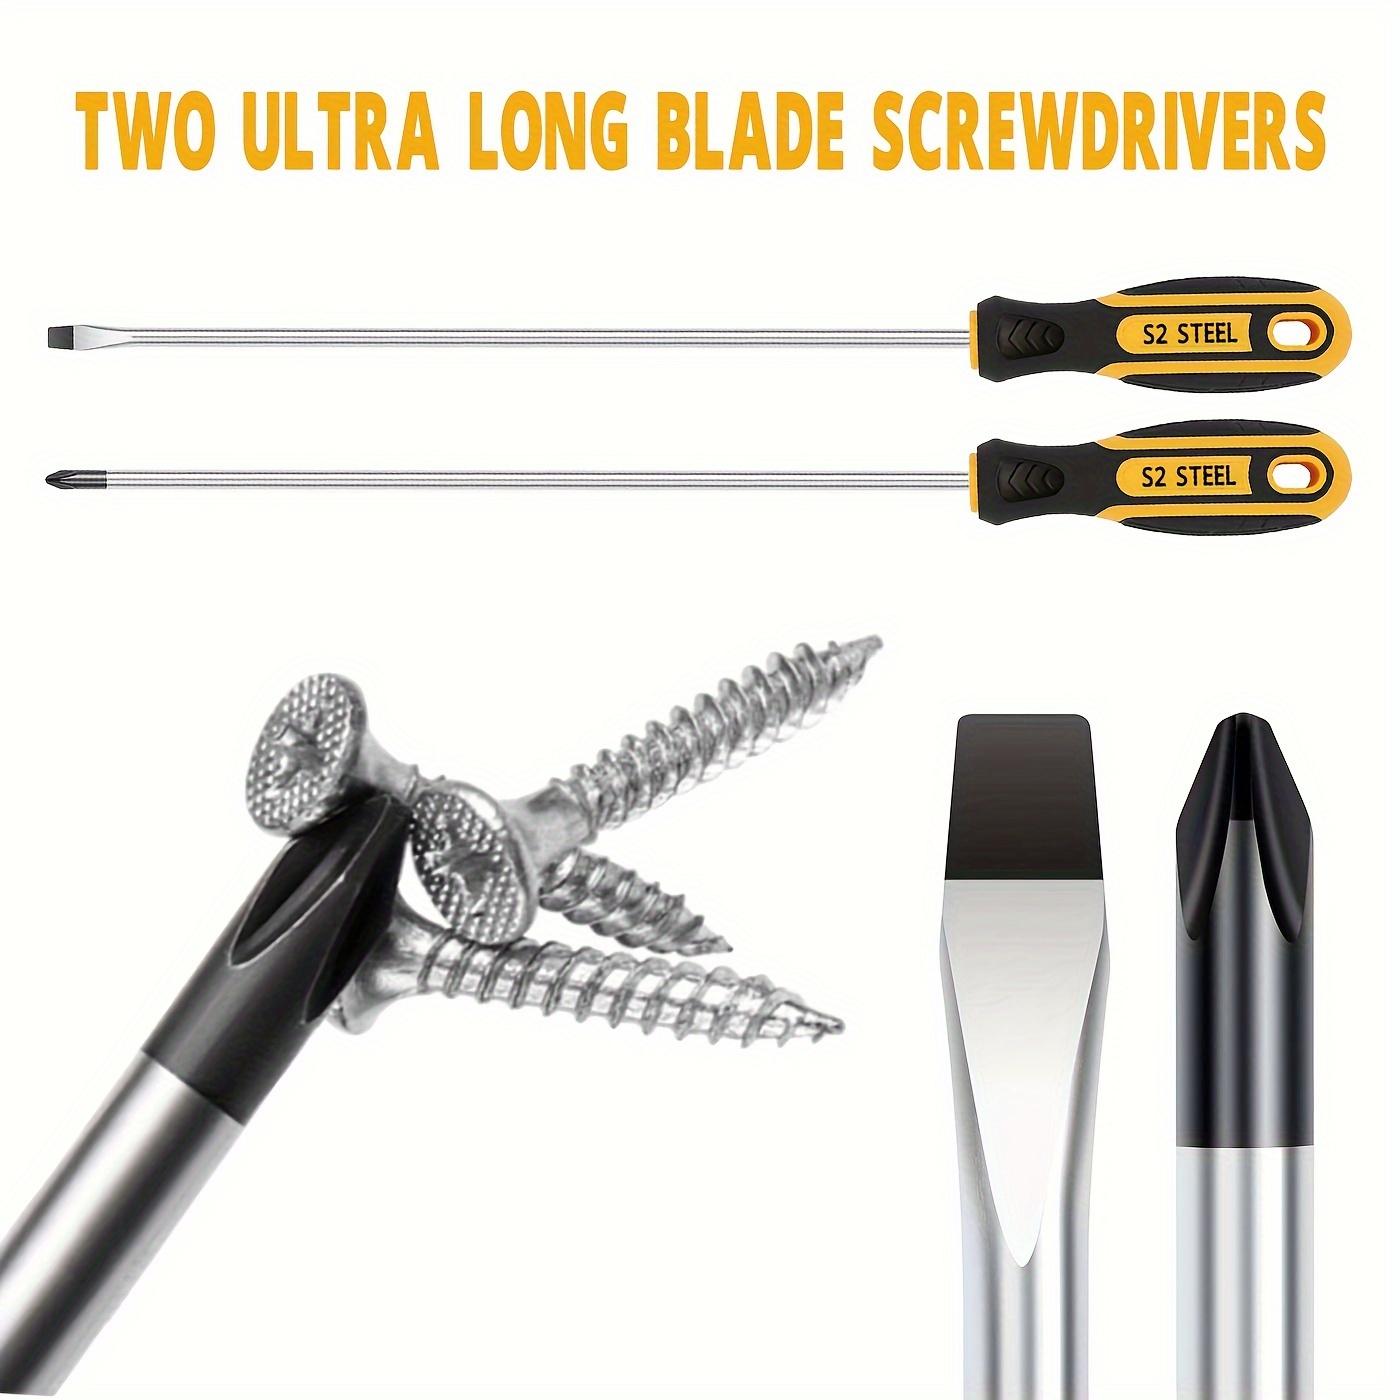 

2pcs Long Screwdriver, 11.8in Long Blade Screwdriver Set Magnetic Screwdriver, Phillips & Slotted Bits. Nice Gifts